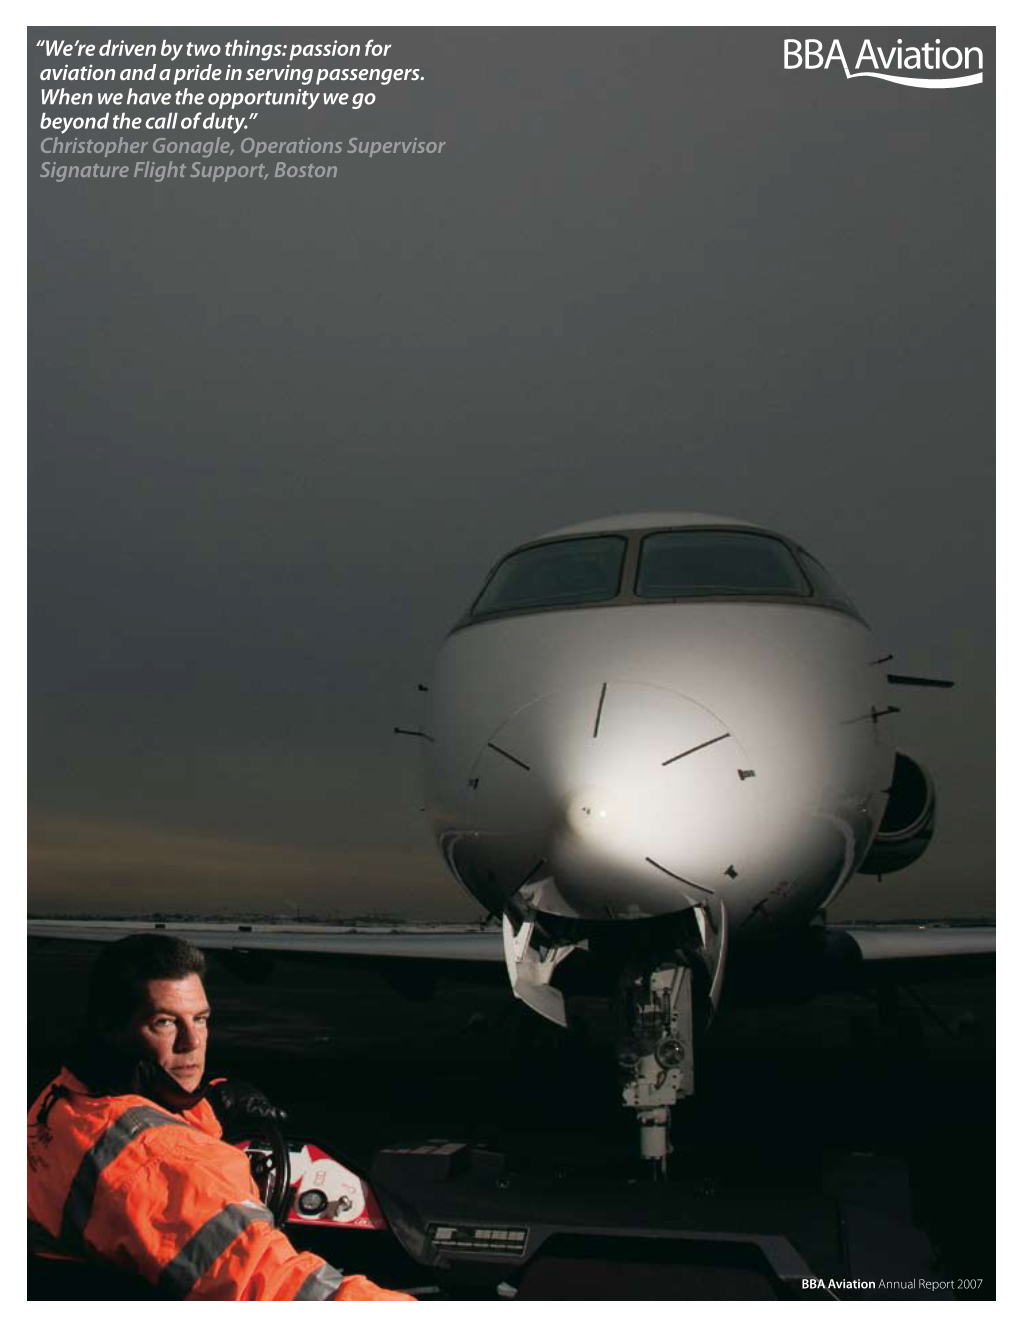 Annual Report 2007 Registered in England Christopher Gonagle, Operations Supervisor Company Number: 53688 Signature Flight Support, Boston